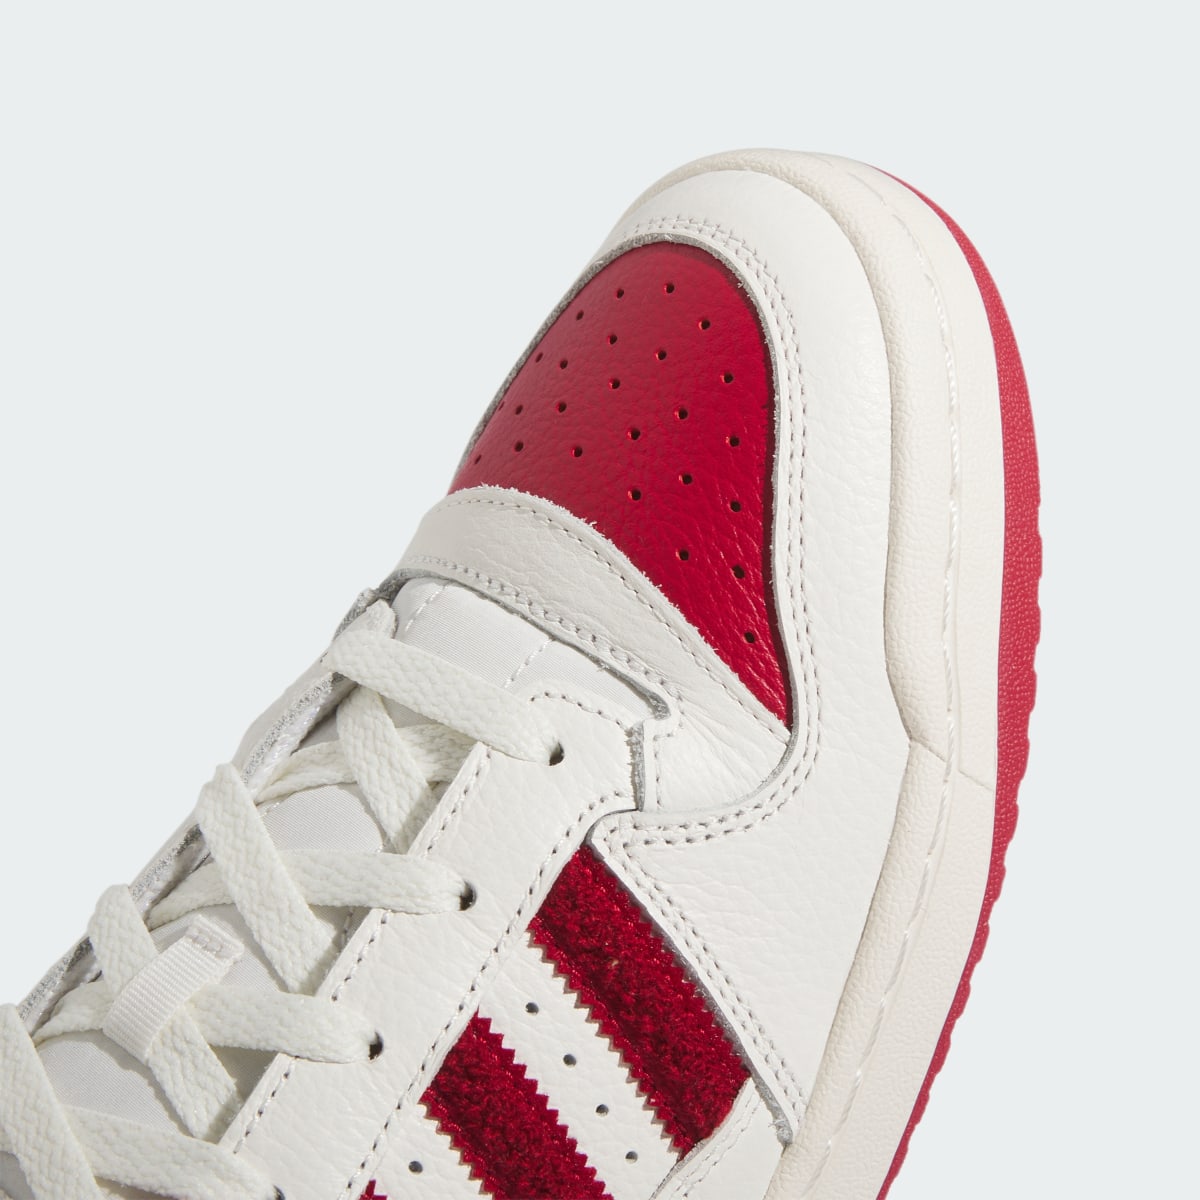 Adidas Indiana Forum Low Shoes. 9